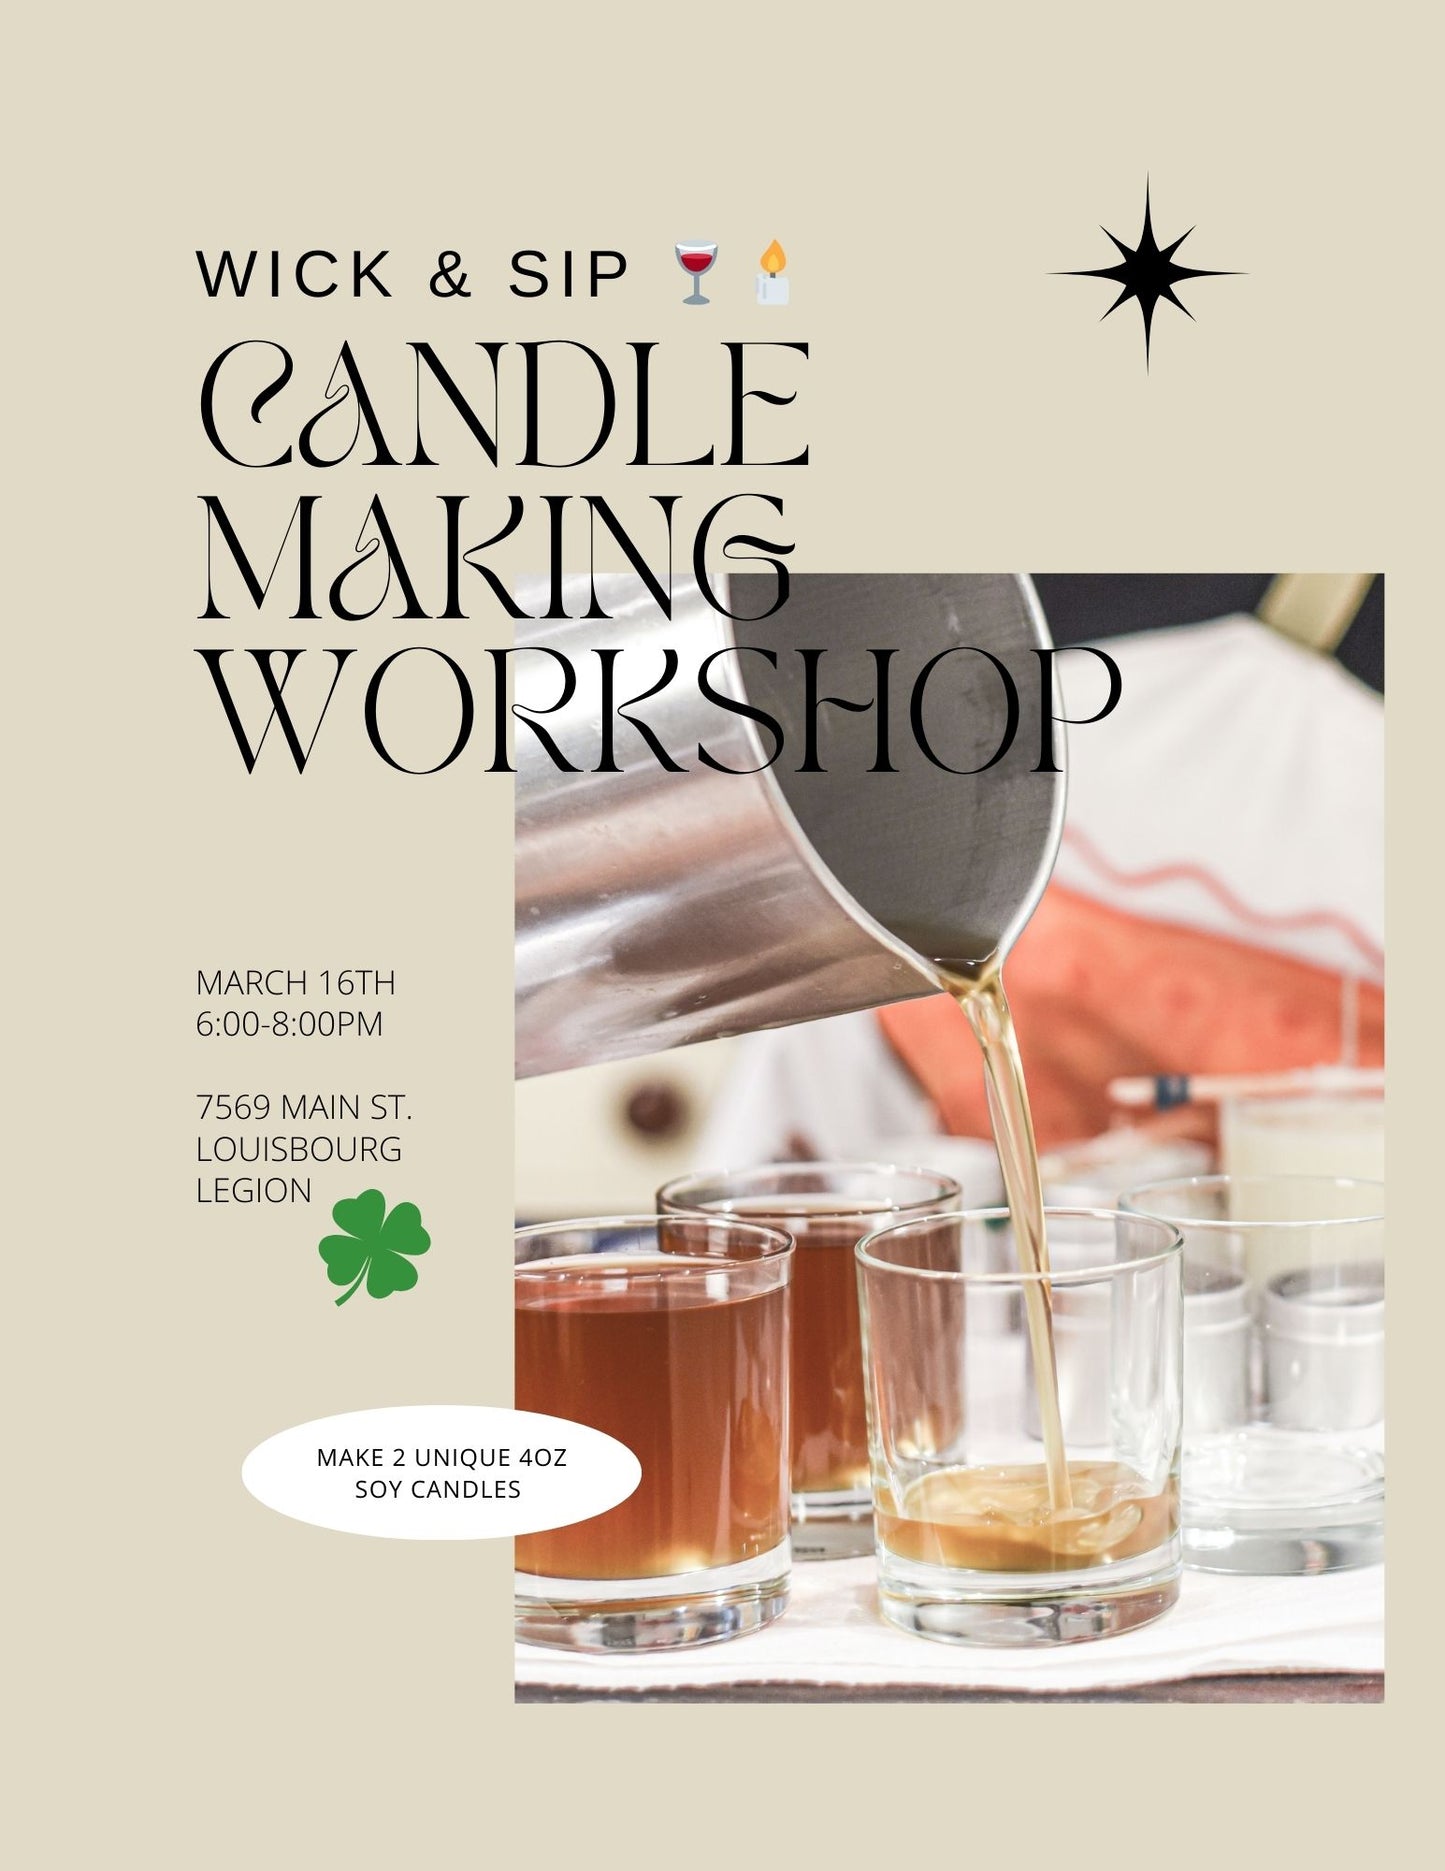 Canapa Candle - Wick & Sip Candle Making Workshop: March 16th